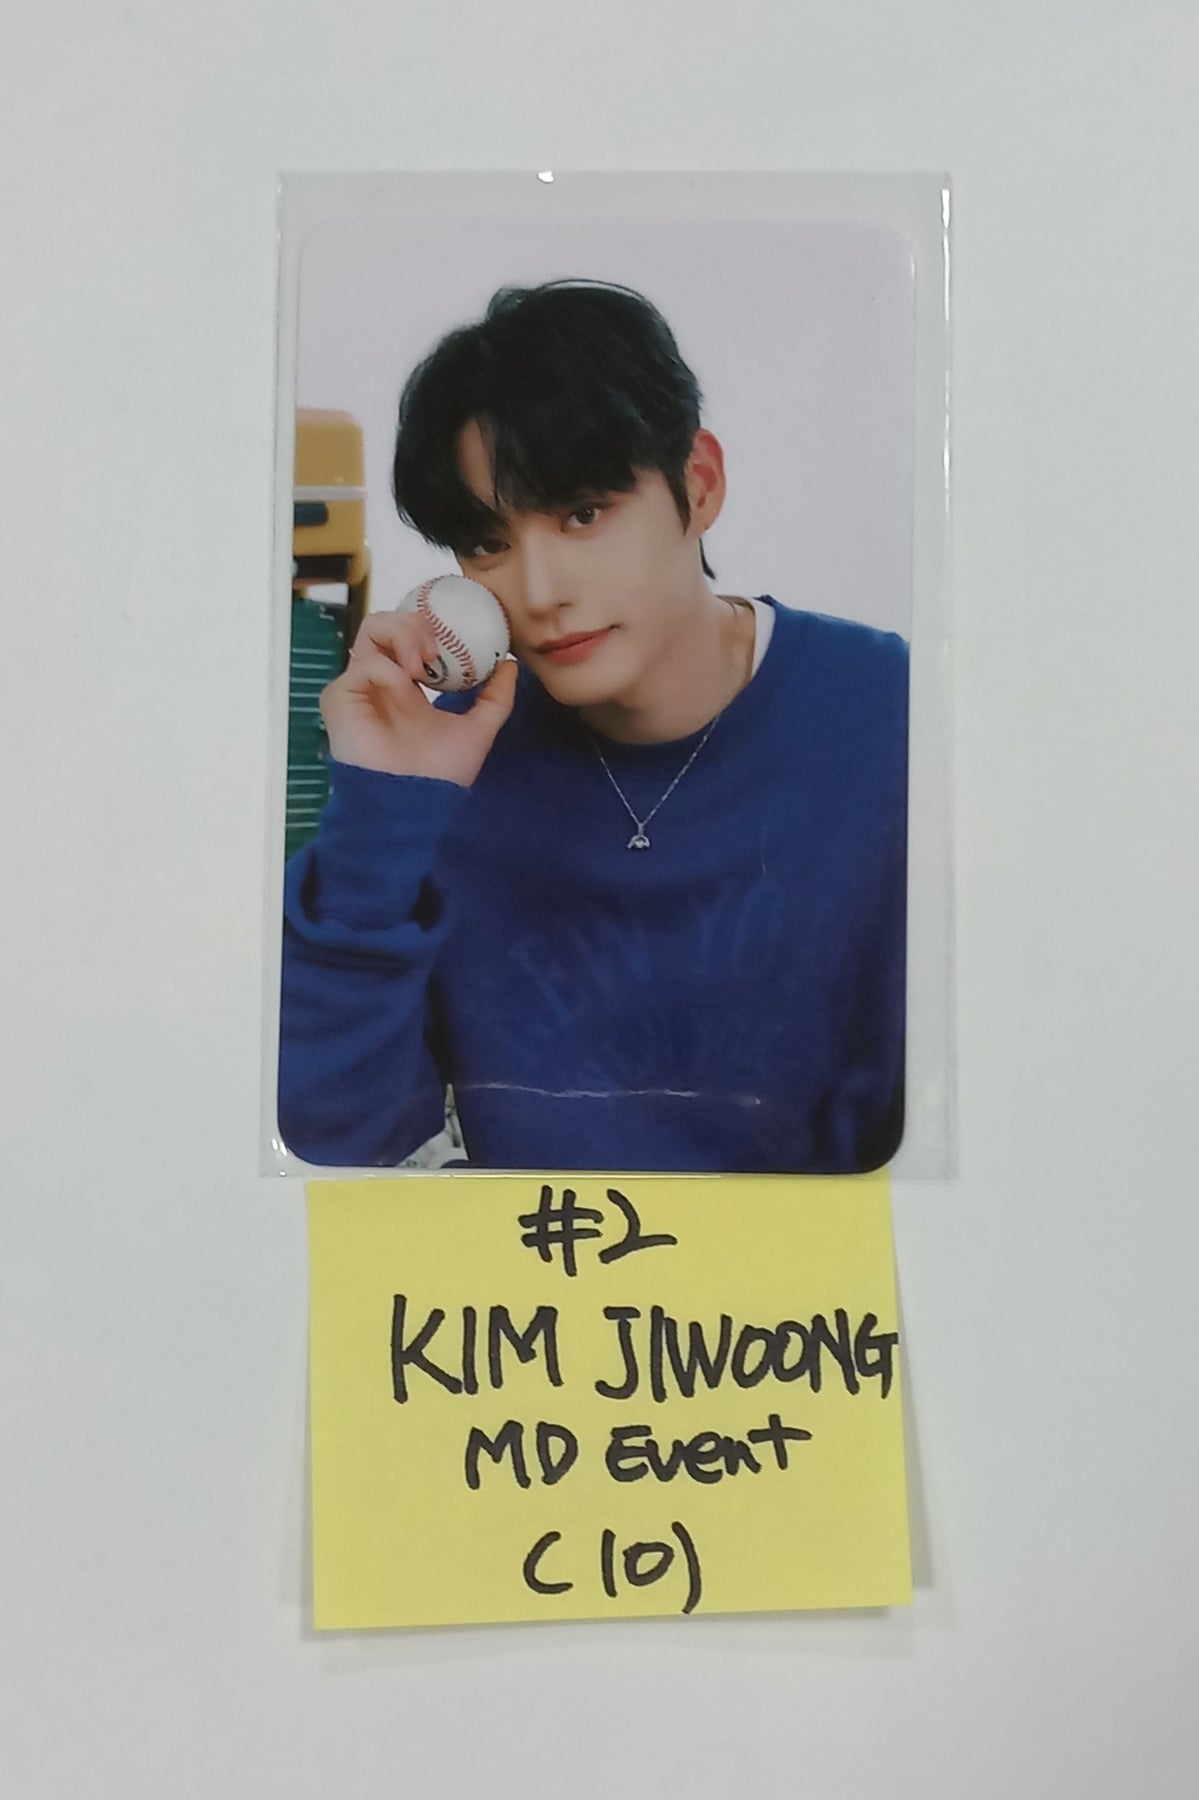 ZEROBASEONE (ZB1) ‘The Moving Seoul Pop-up Store’ - MD Event Photocard